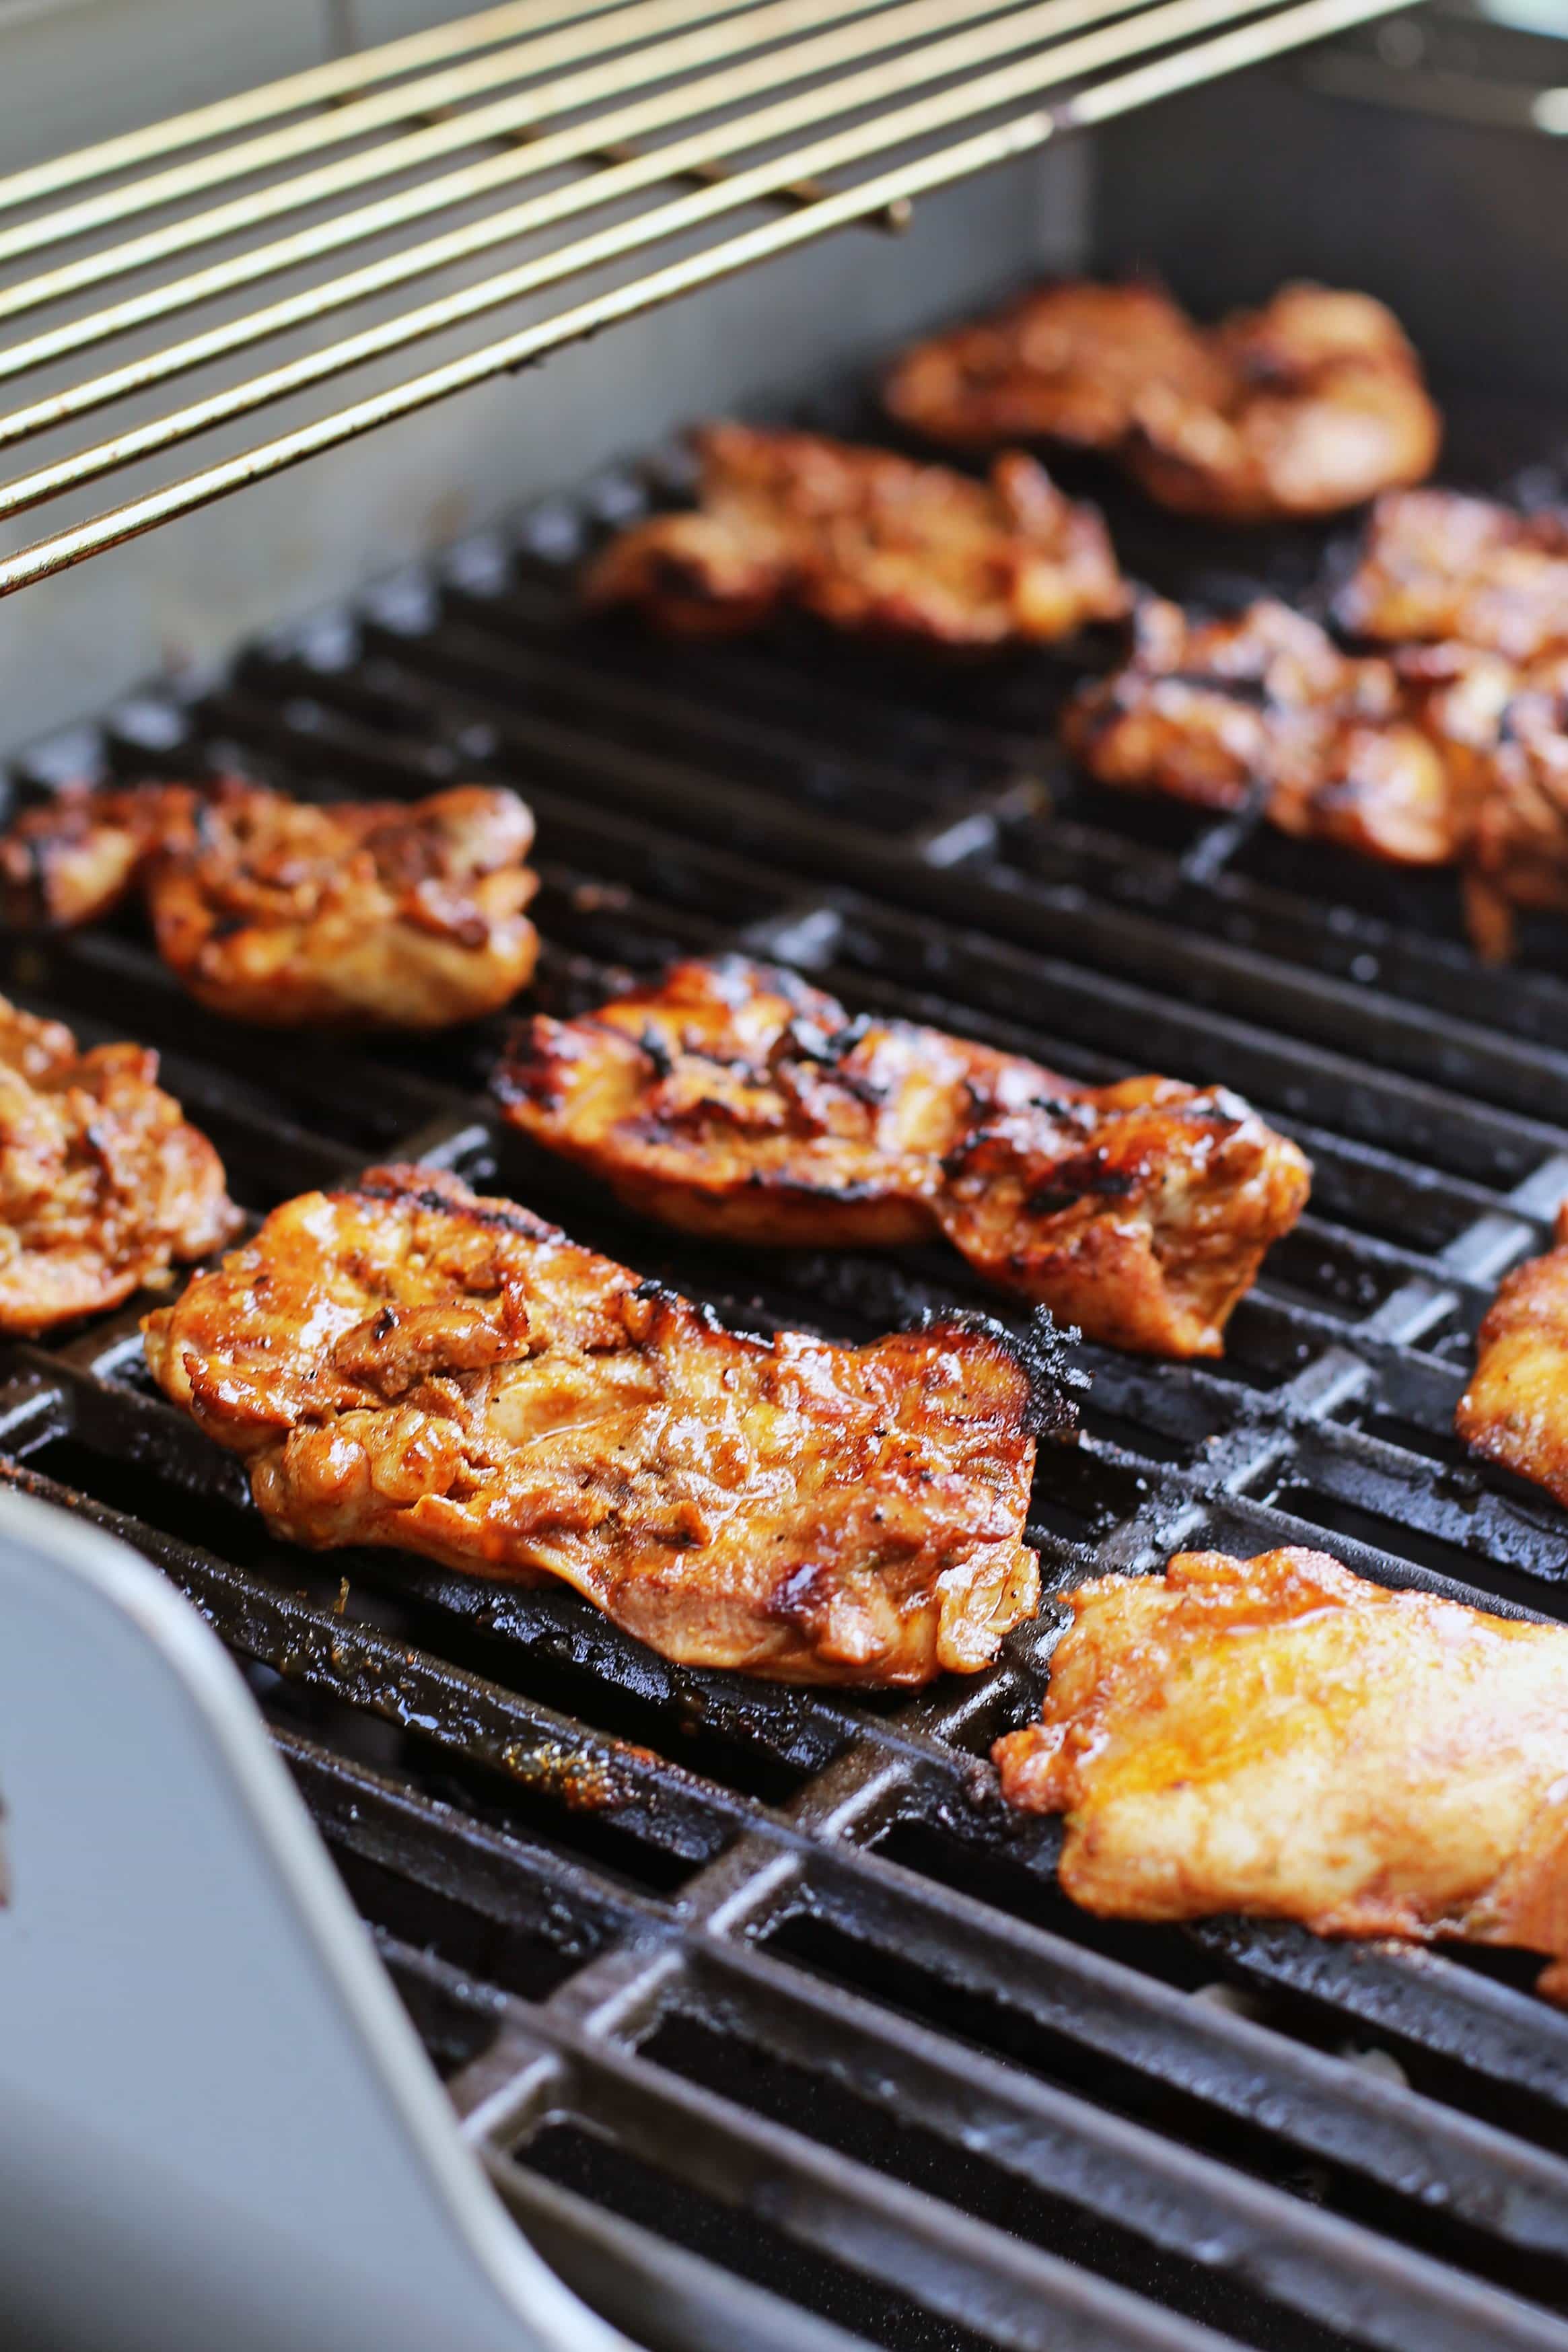 Chili lime chicken thighs cooking on a hot barbecue grill.